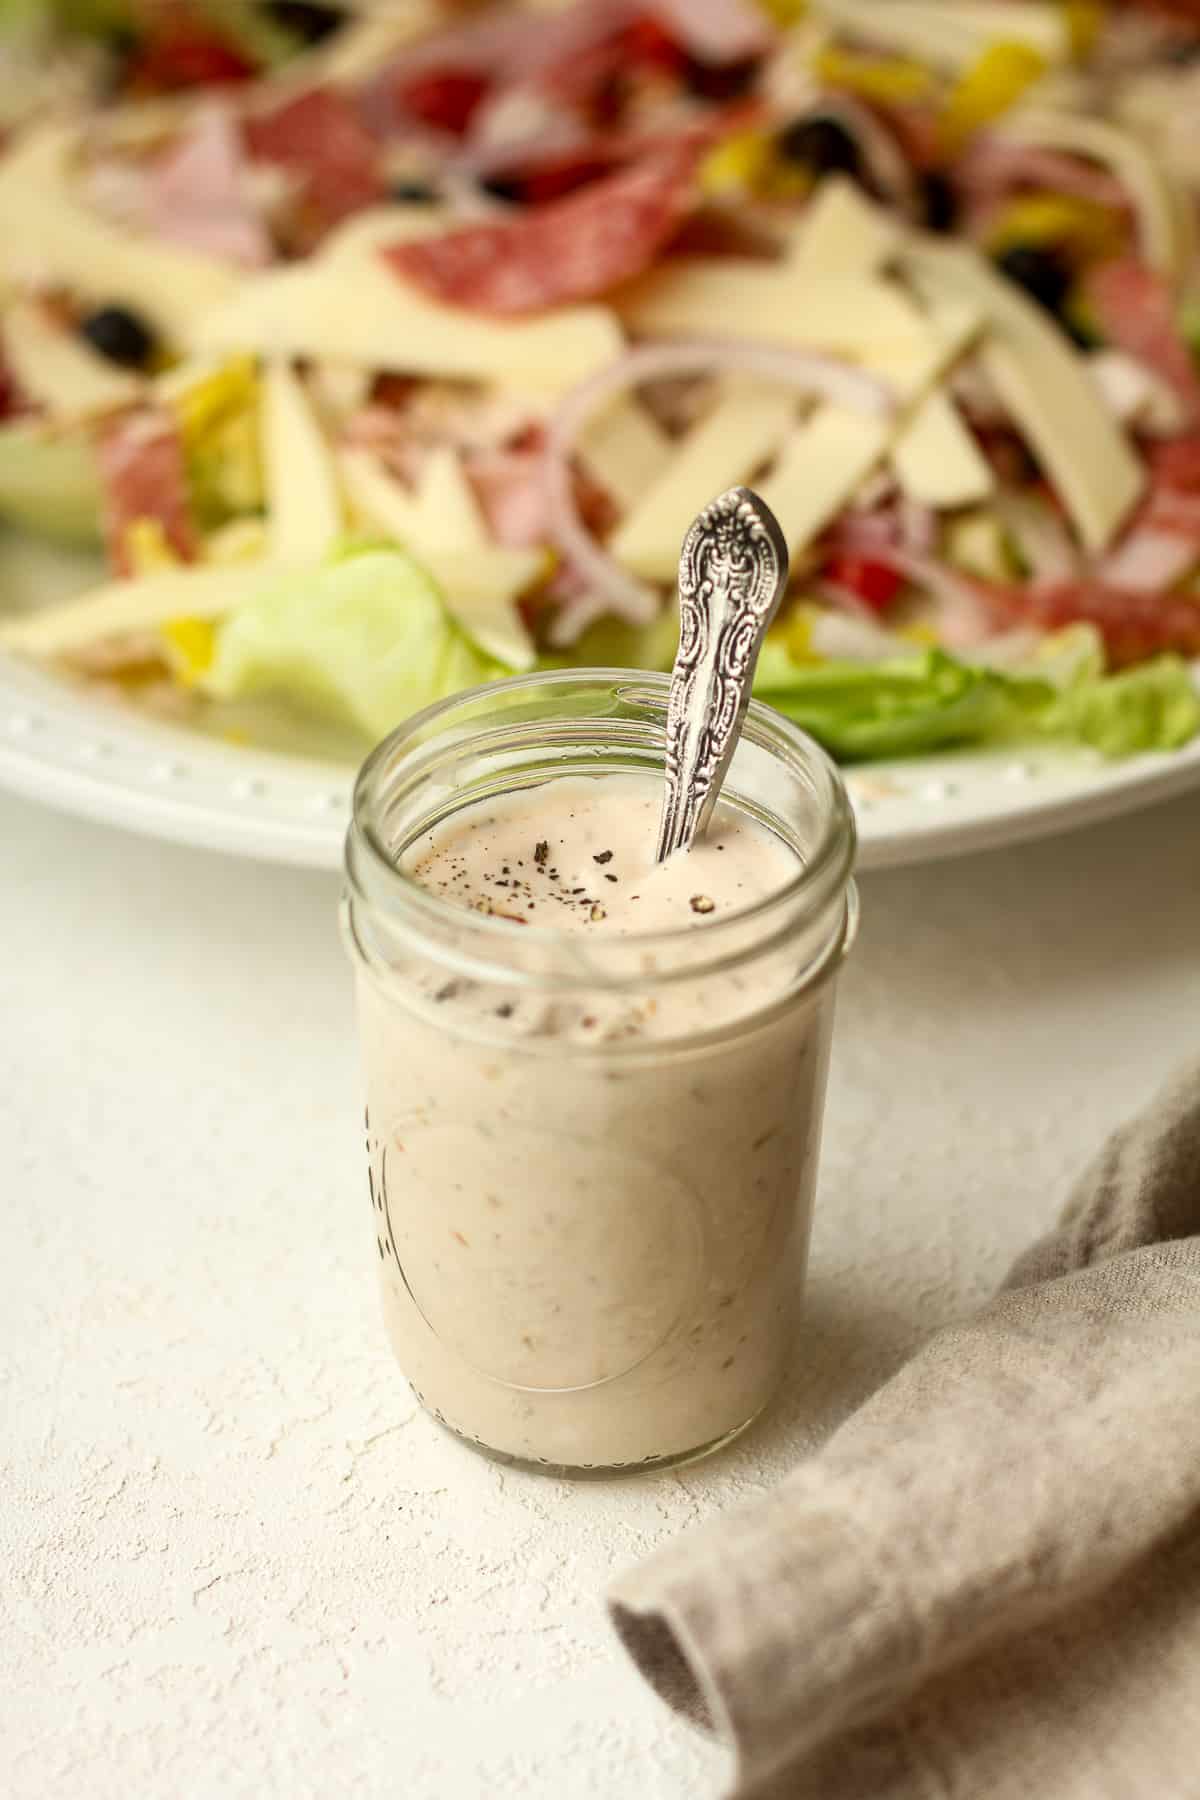 Side view of a jar of dressing in front of a platter of grinder salad.